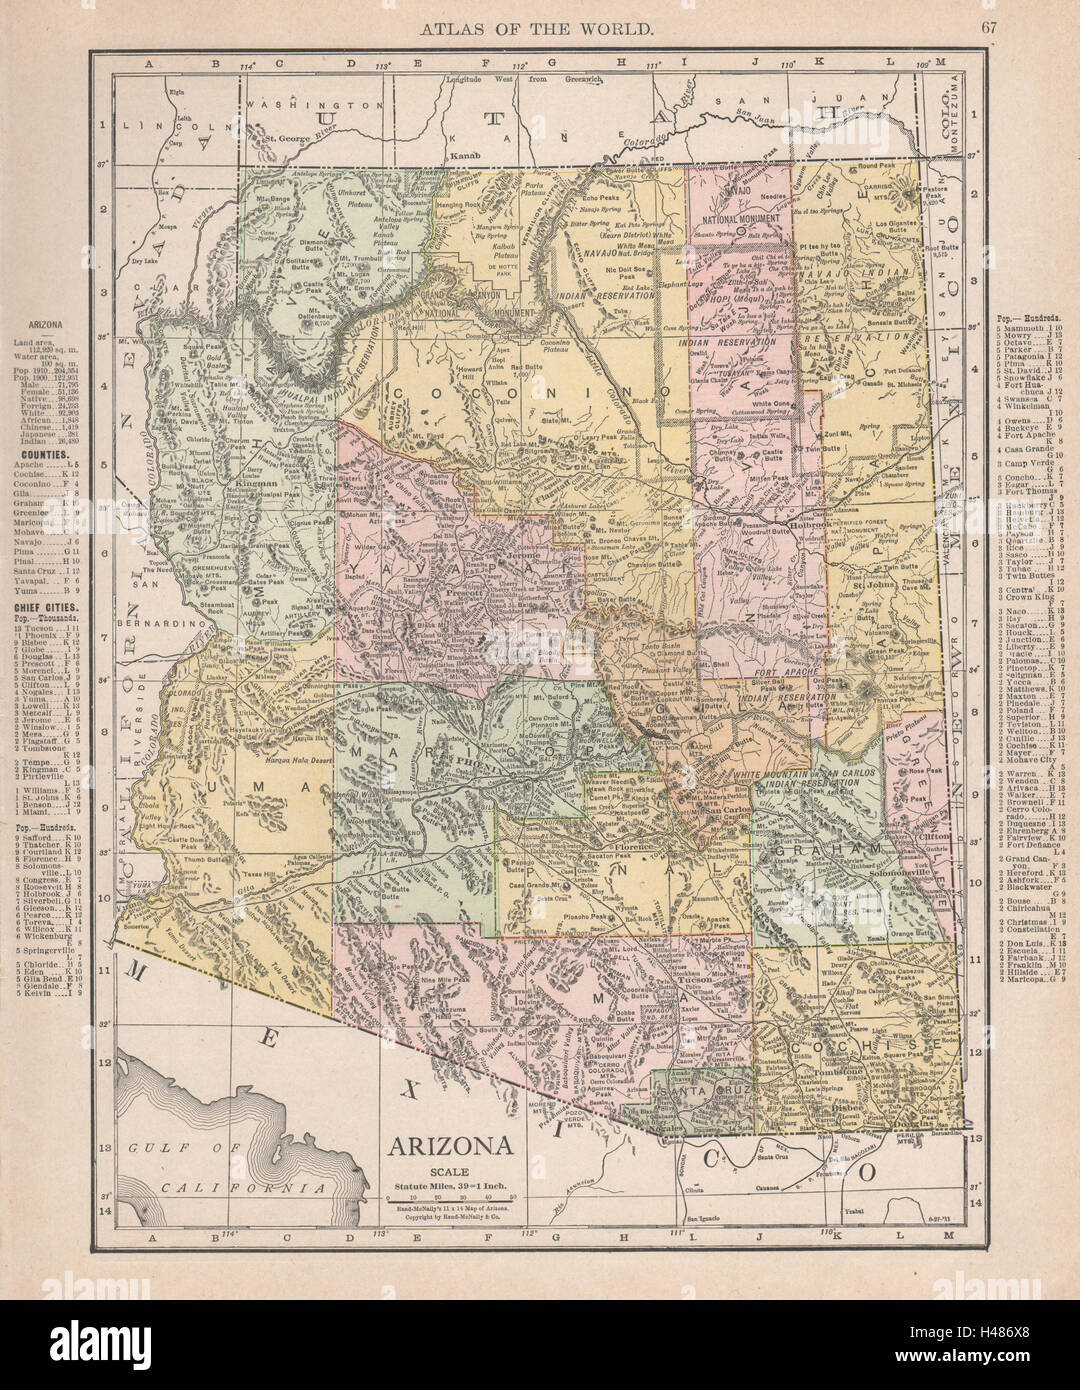 Arizona state map showing counties. RAND MCNALLY 1912 old antique chart Stock Photo